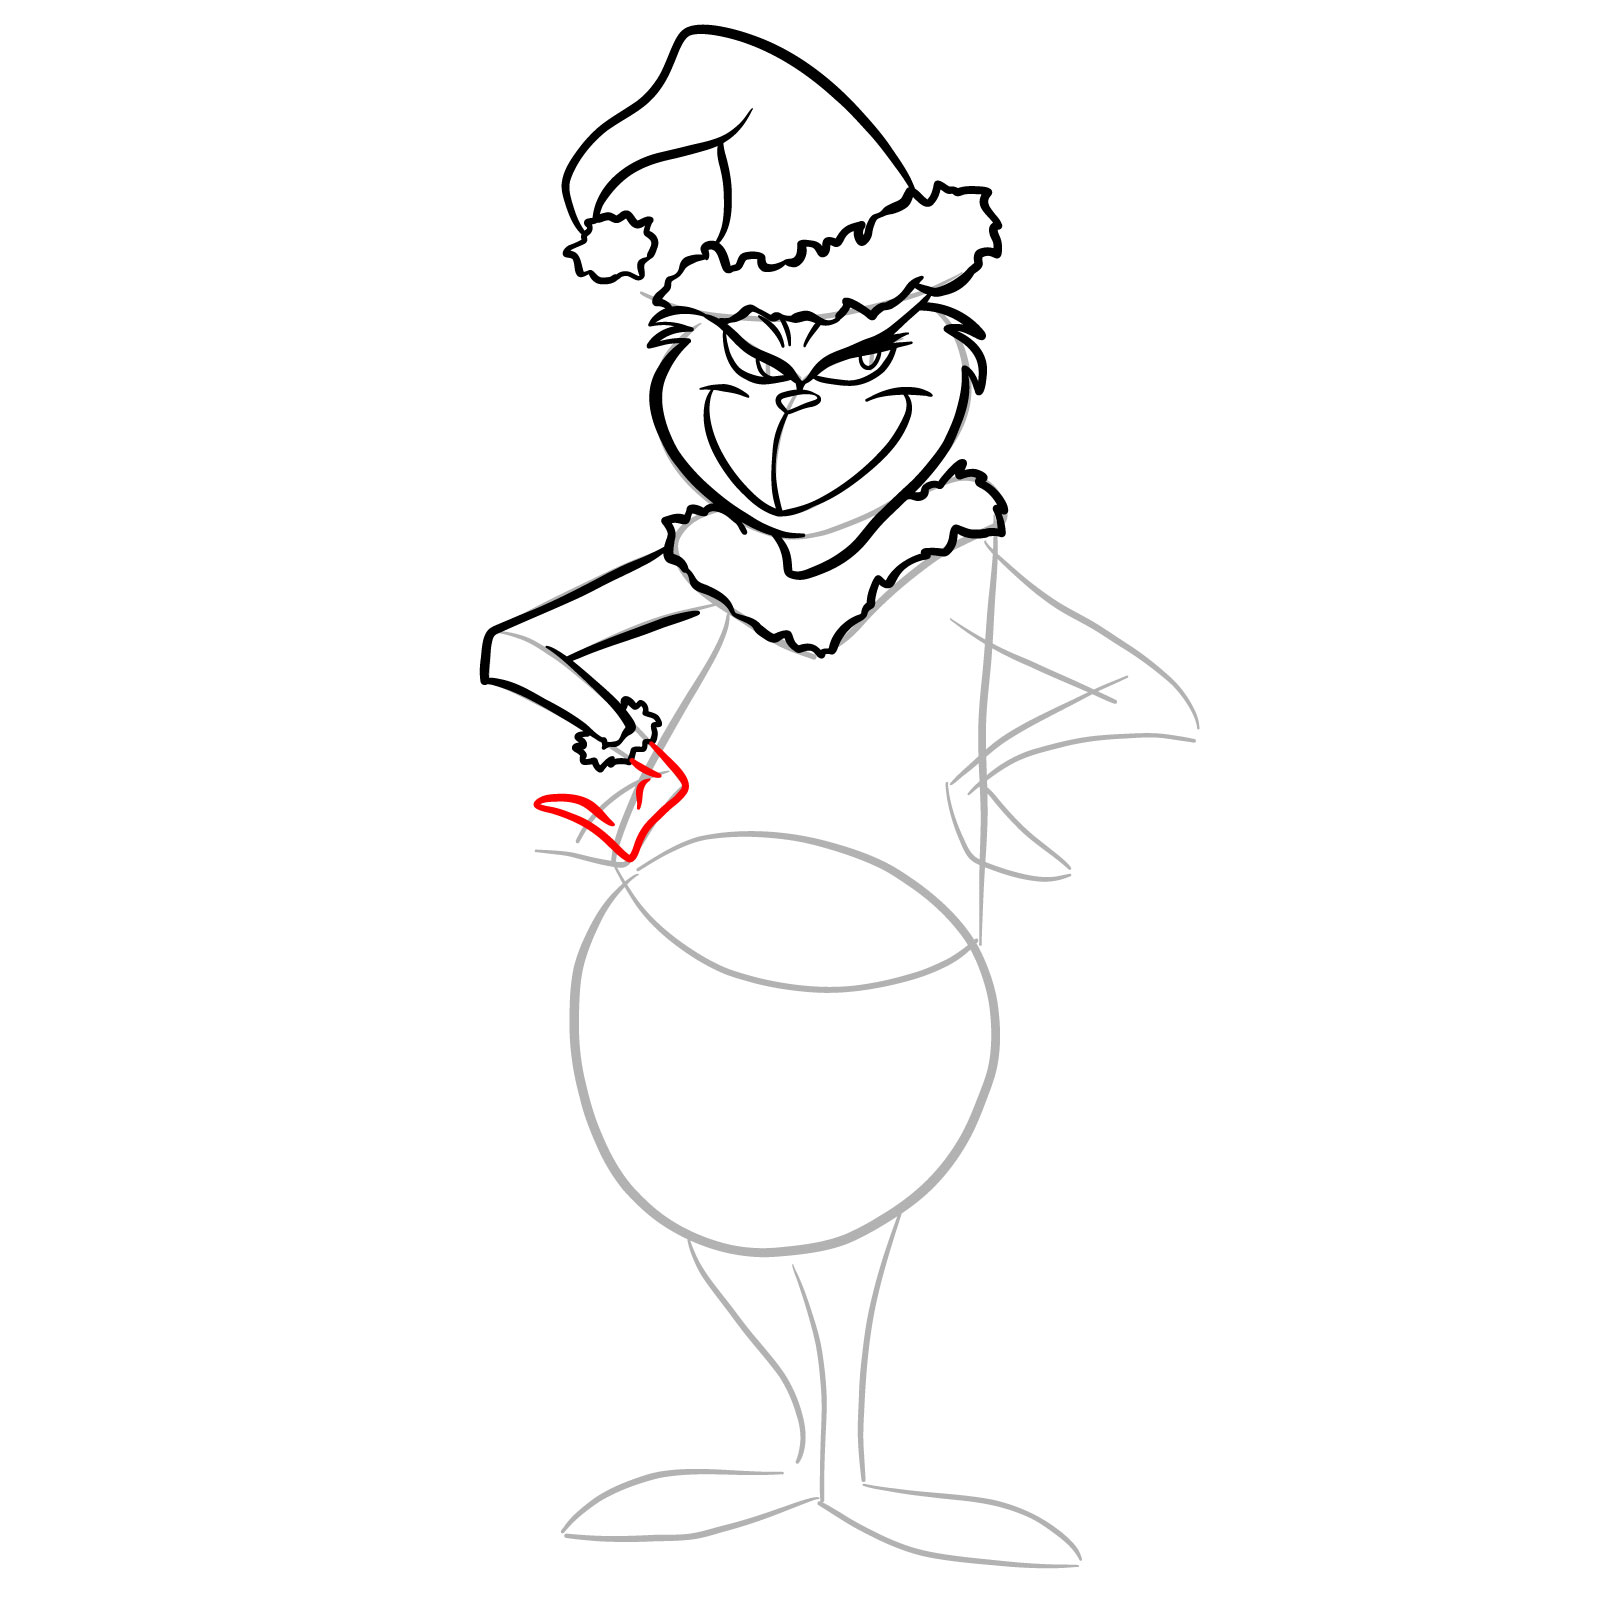 How to draw The Grinch in a Christmas costume - step 15